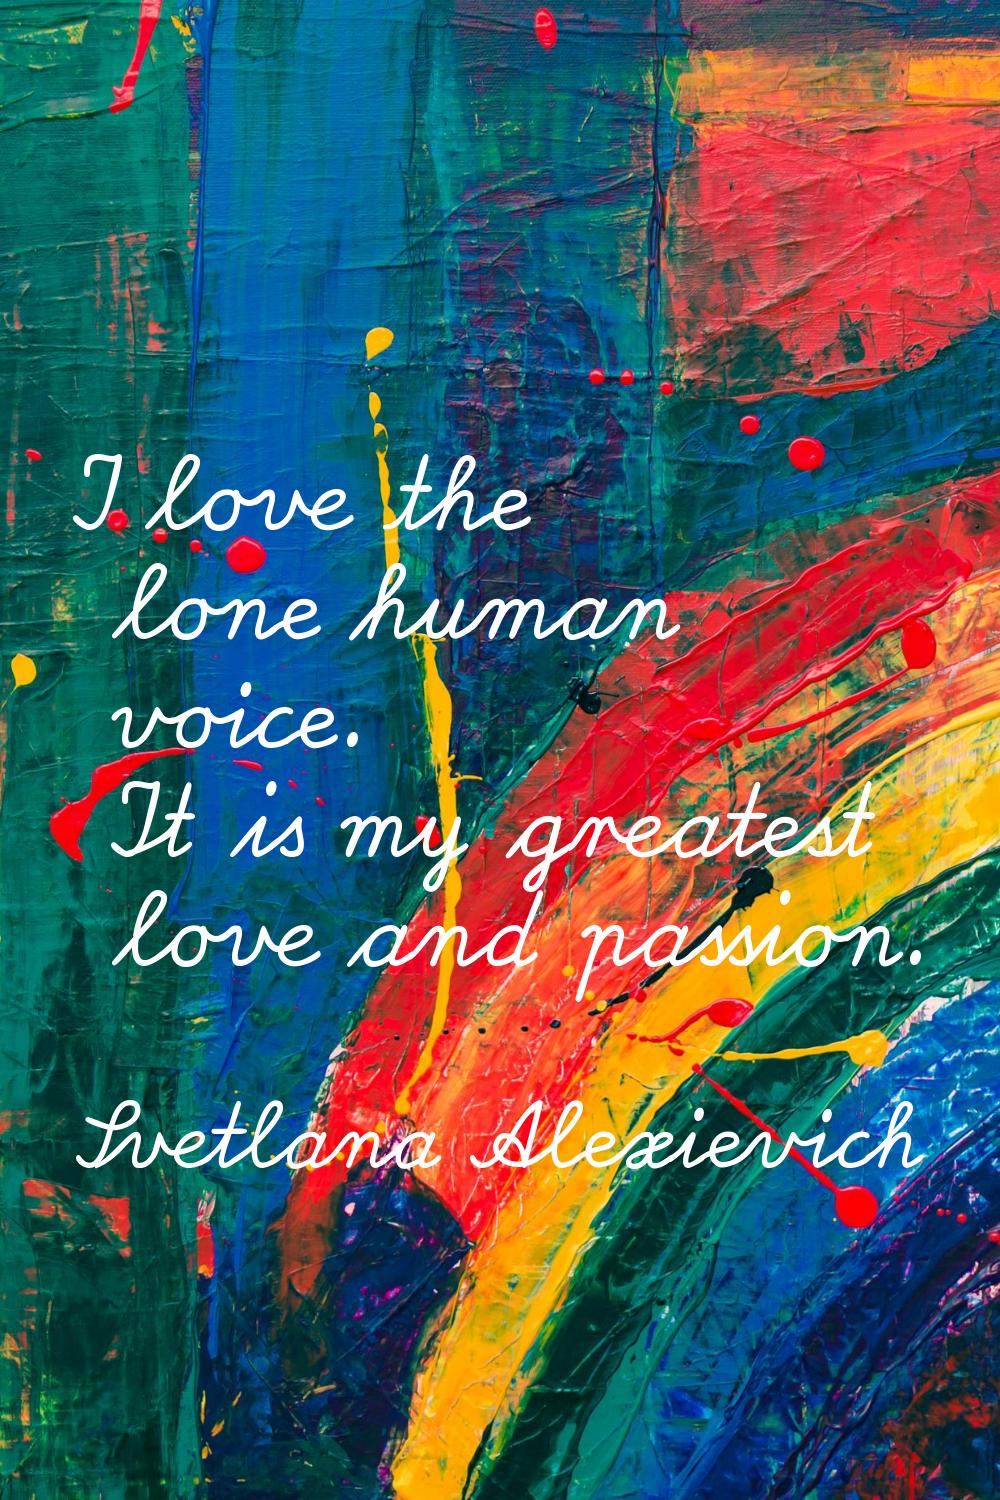 I love the lone human voice. It is my greatest love and passion.